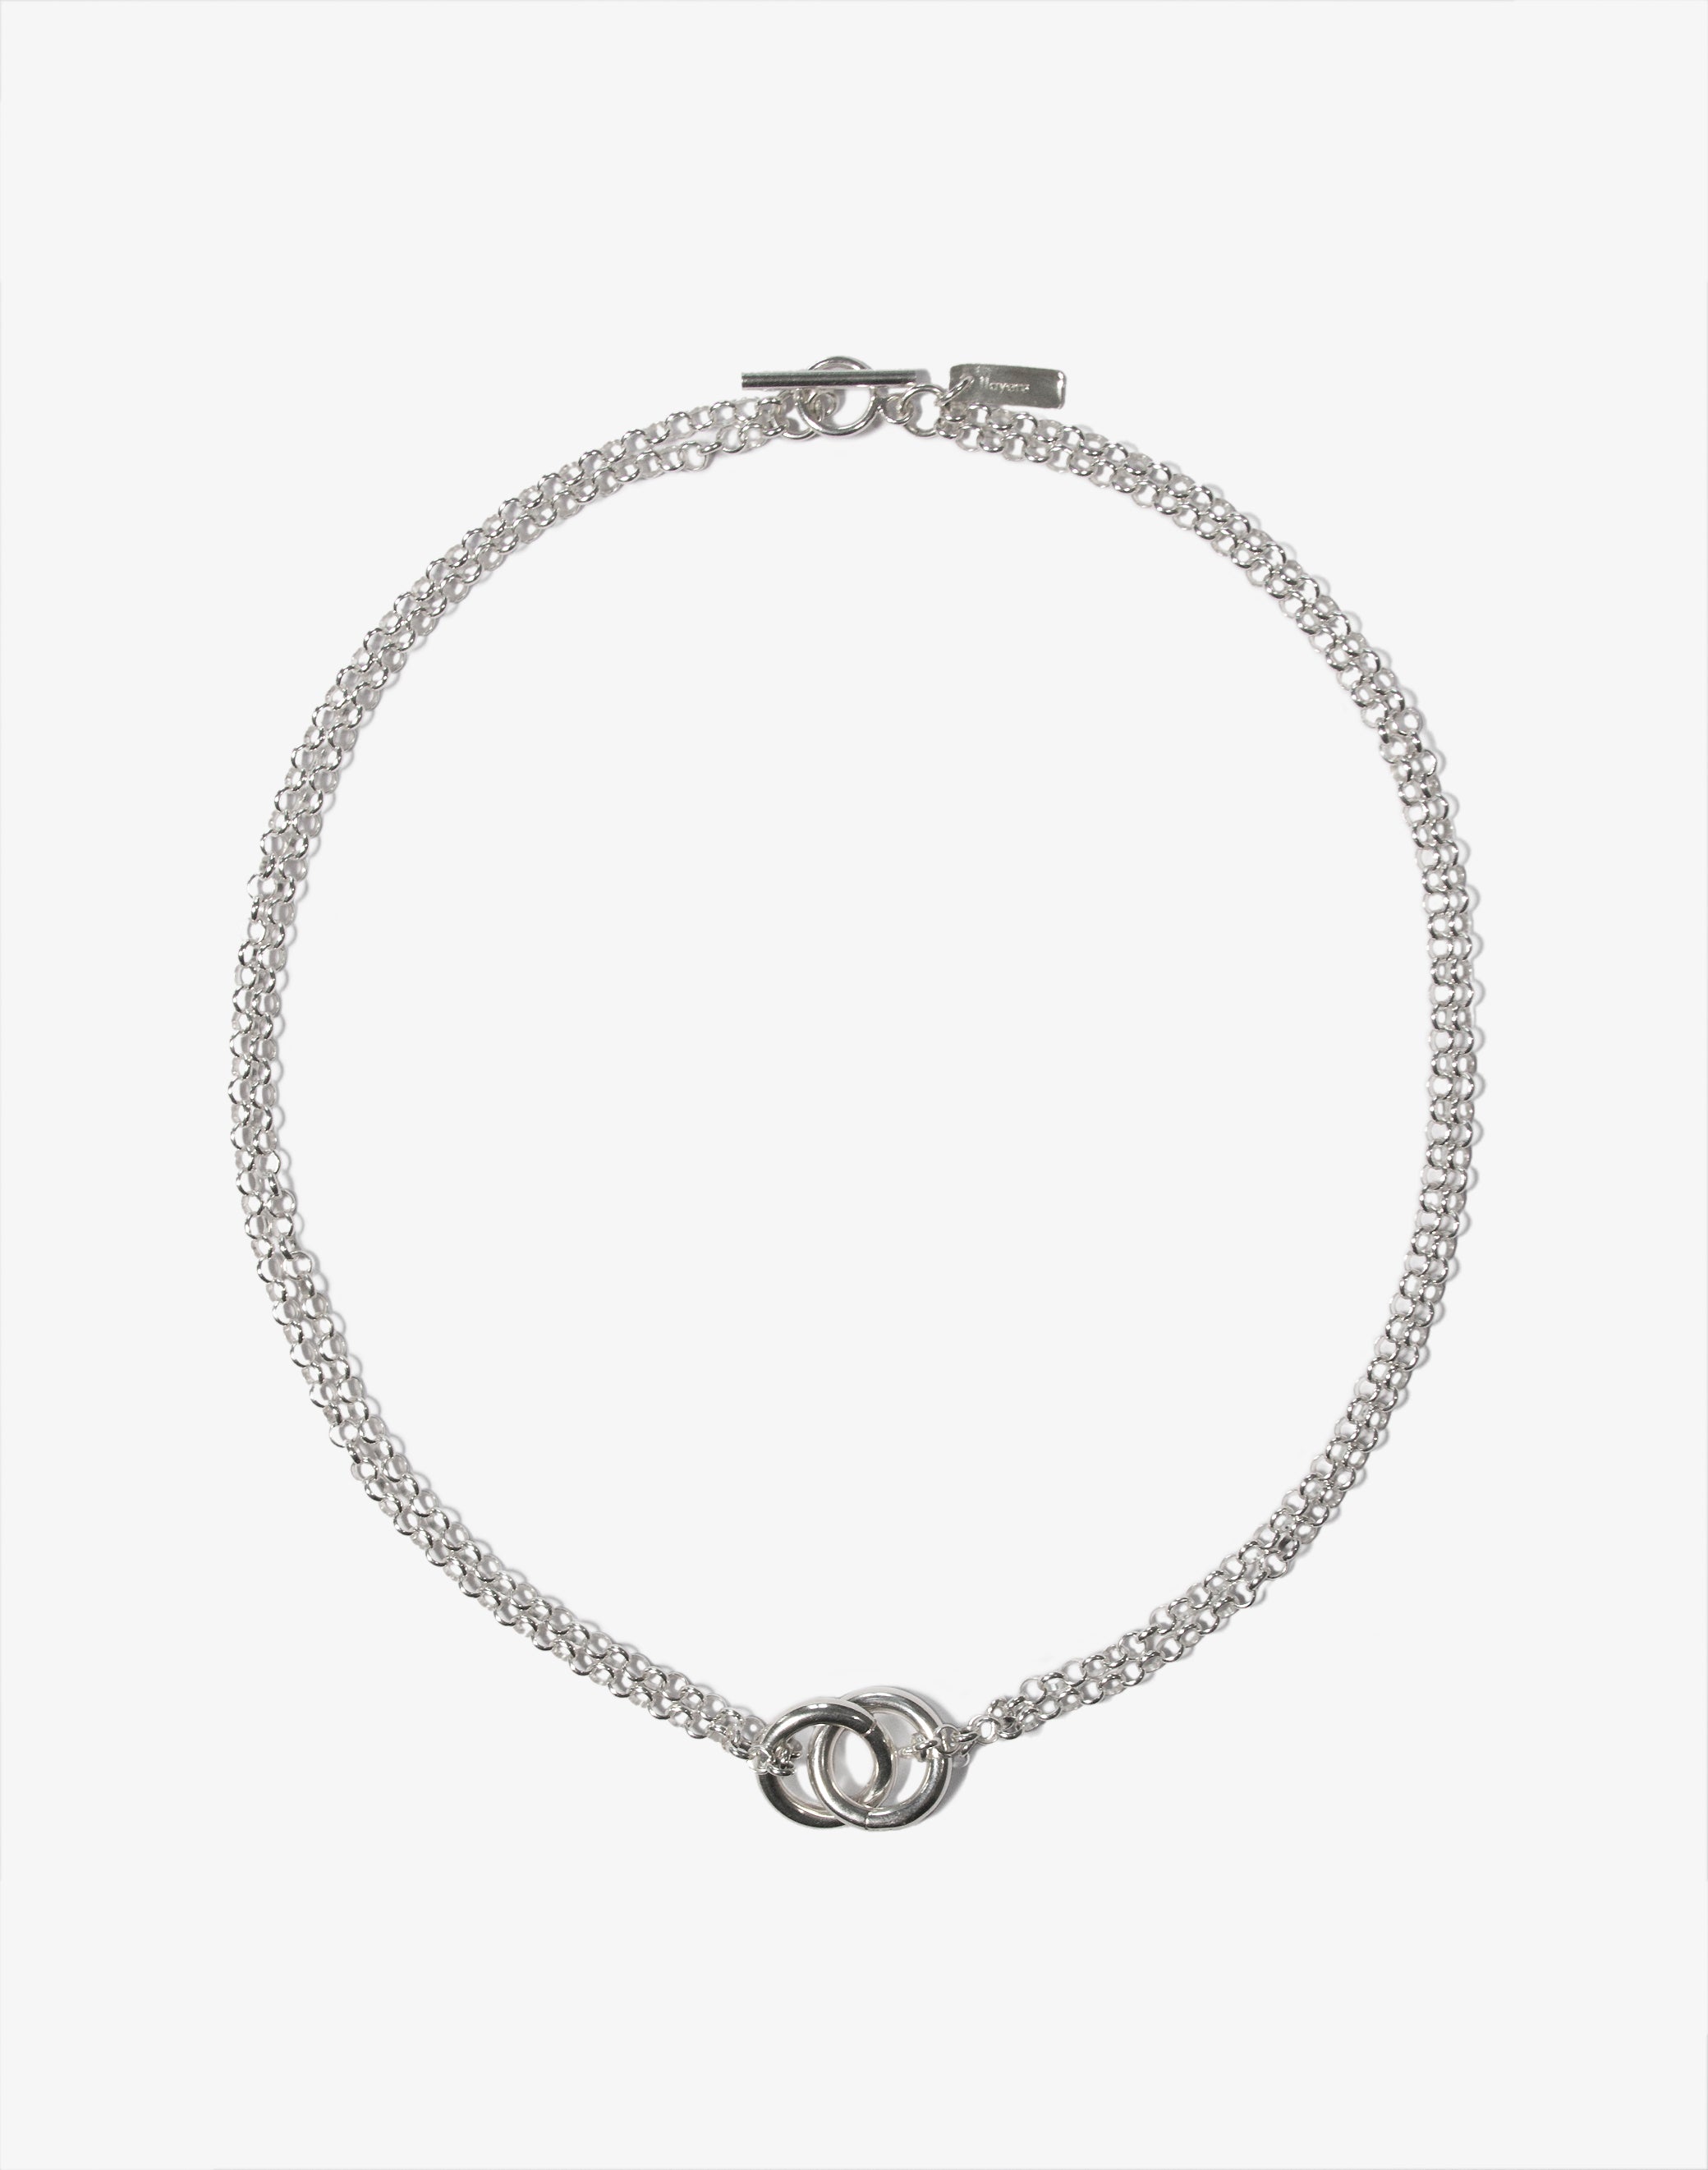 llayers jewelry unite men silver chain rings choker necklace - Made In Brookyn New York 1